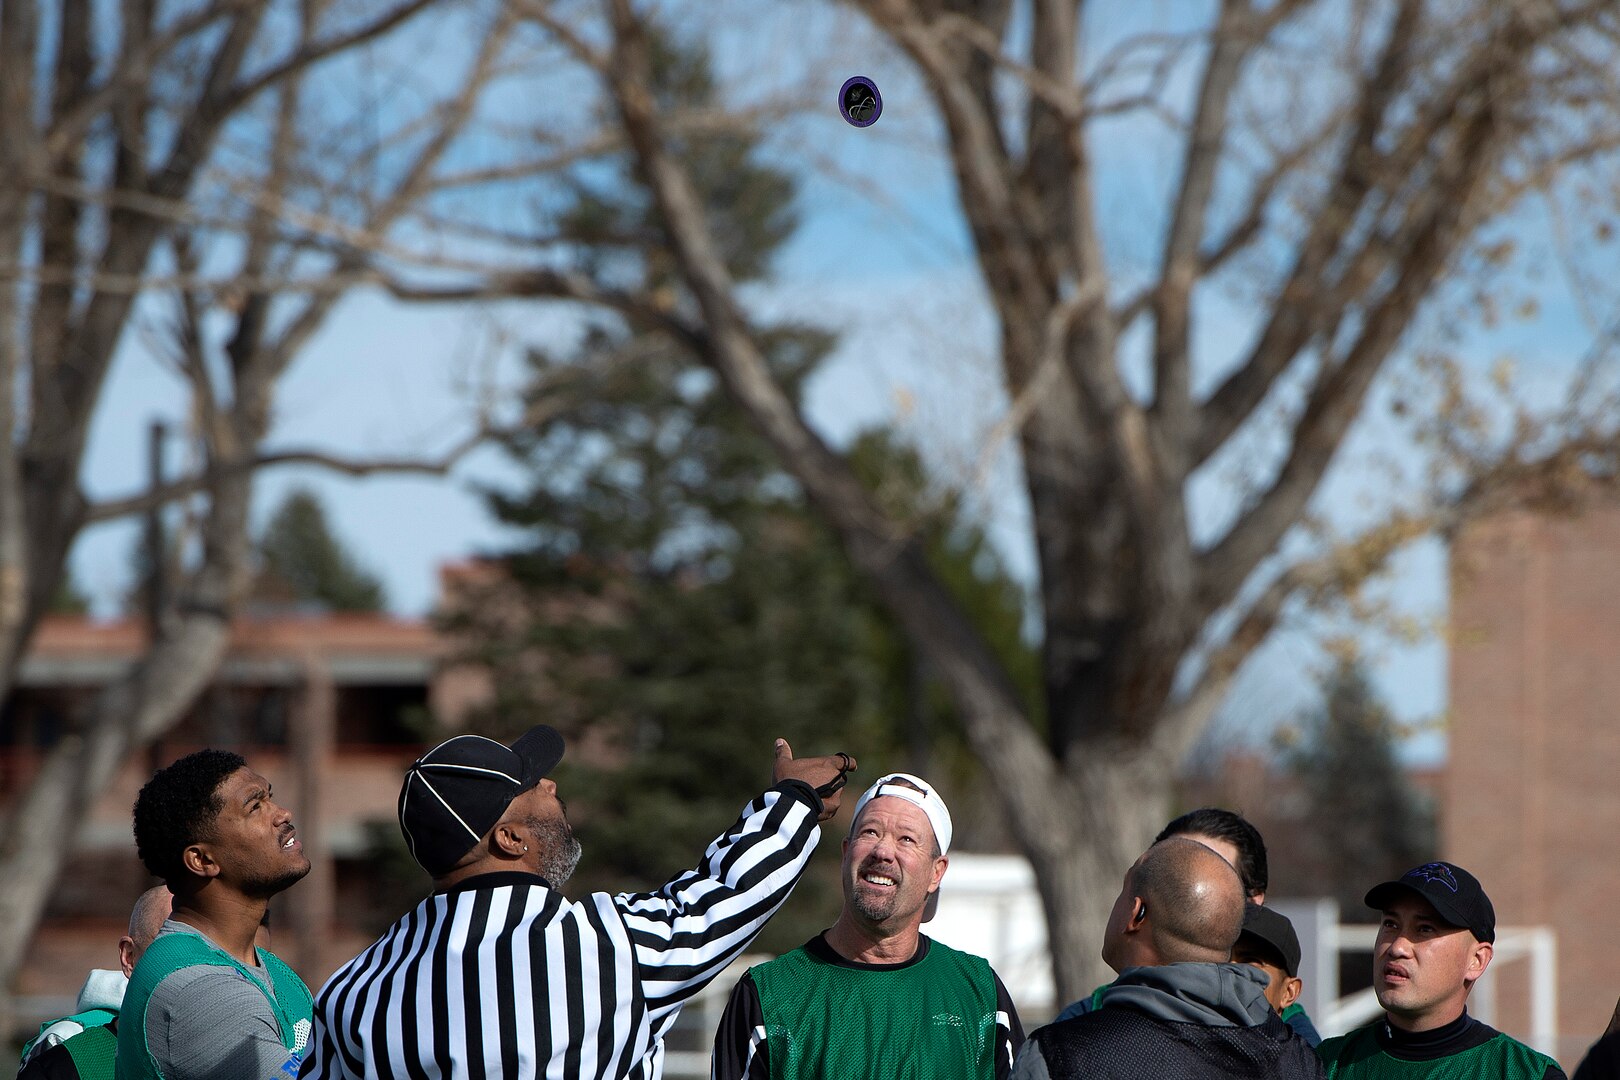 Referee tosses coin as people watch